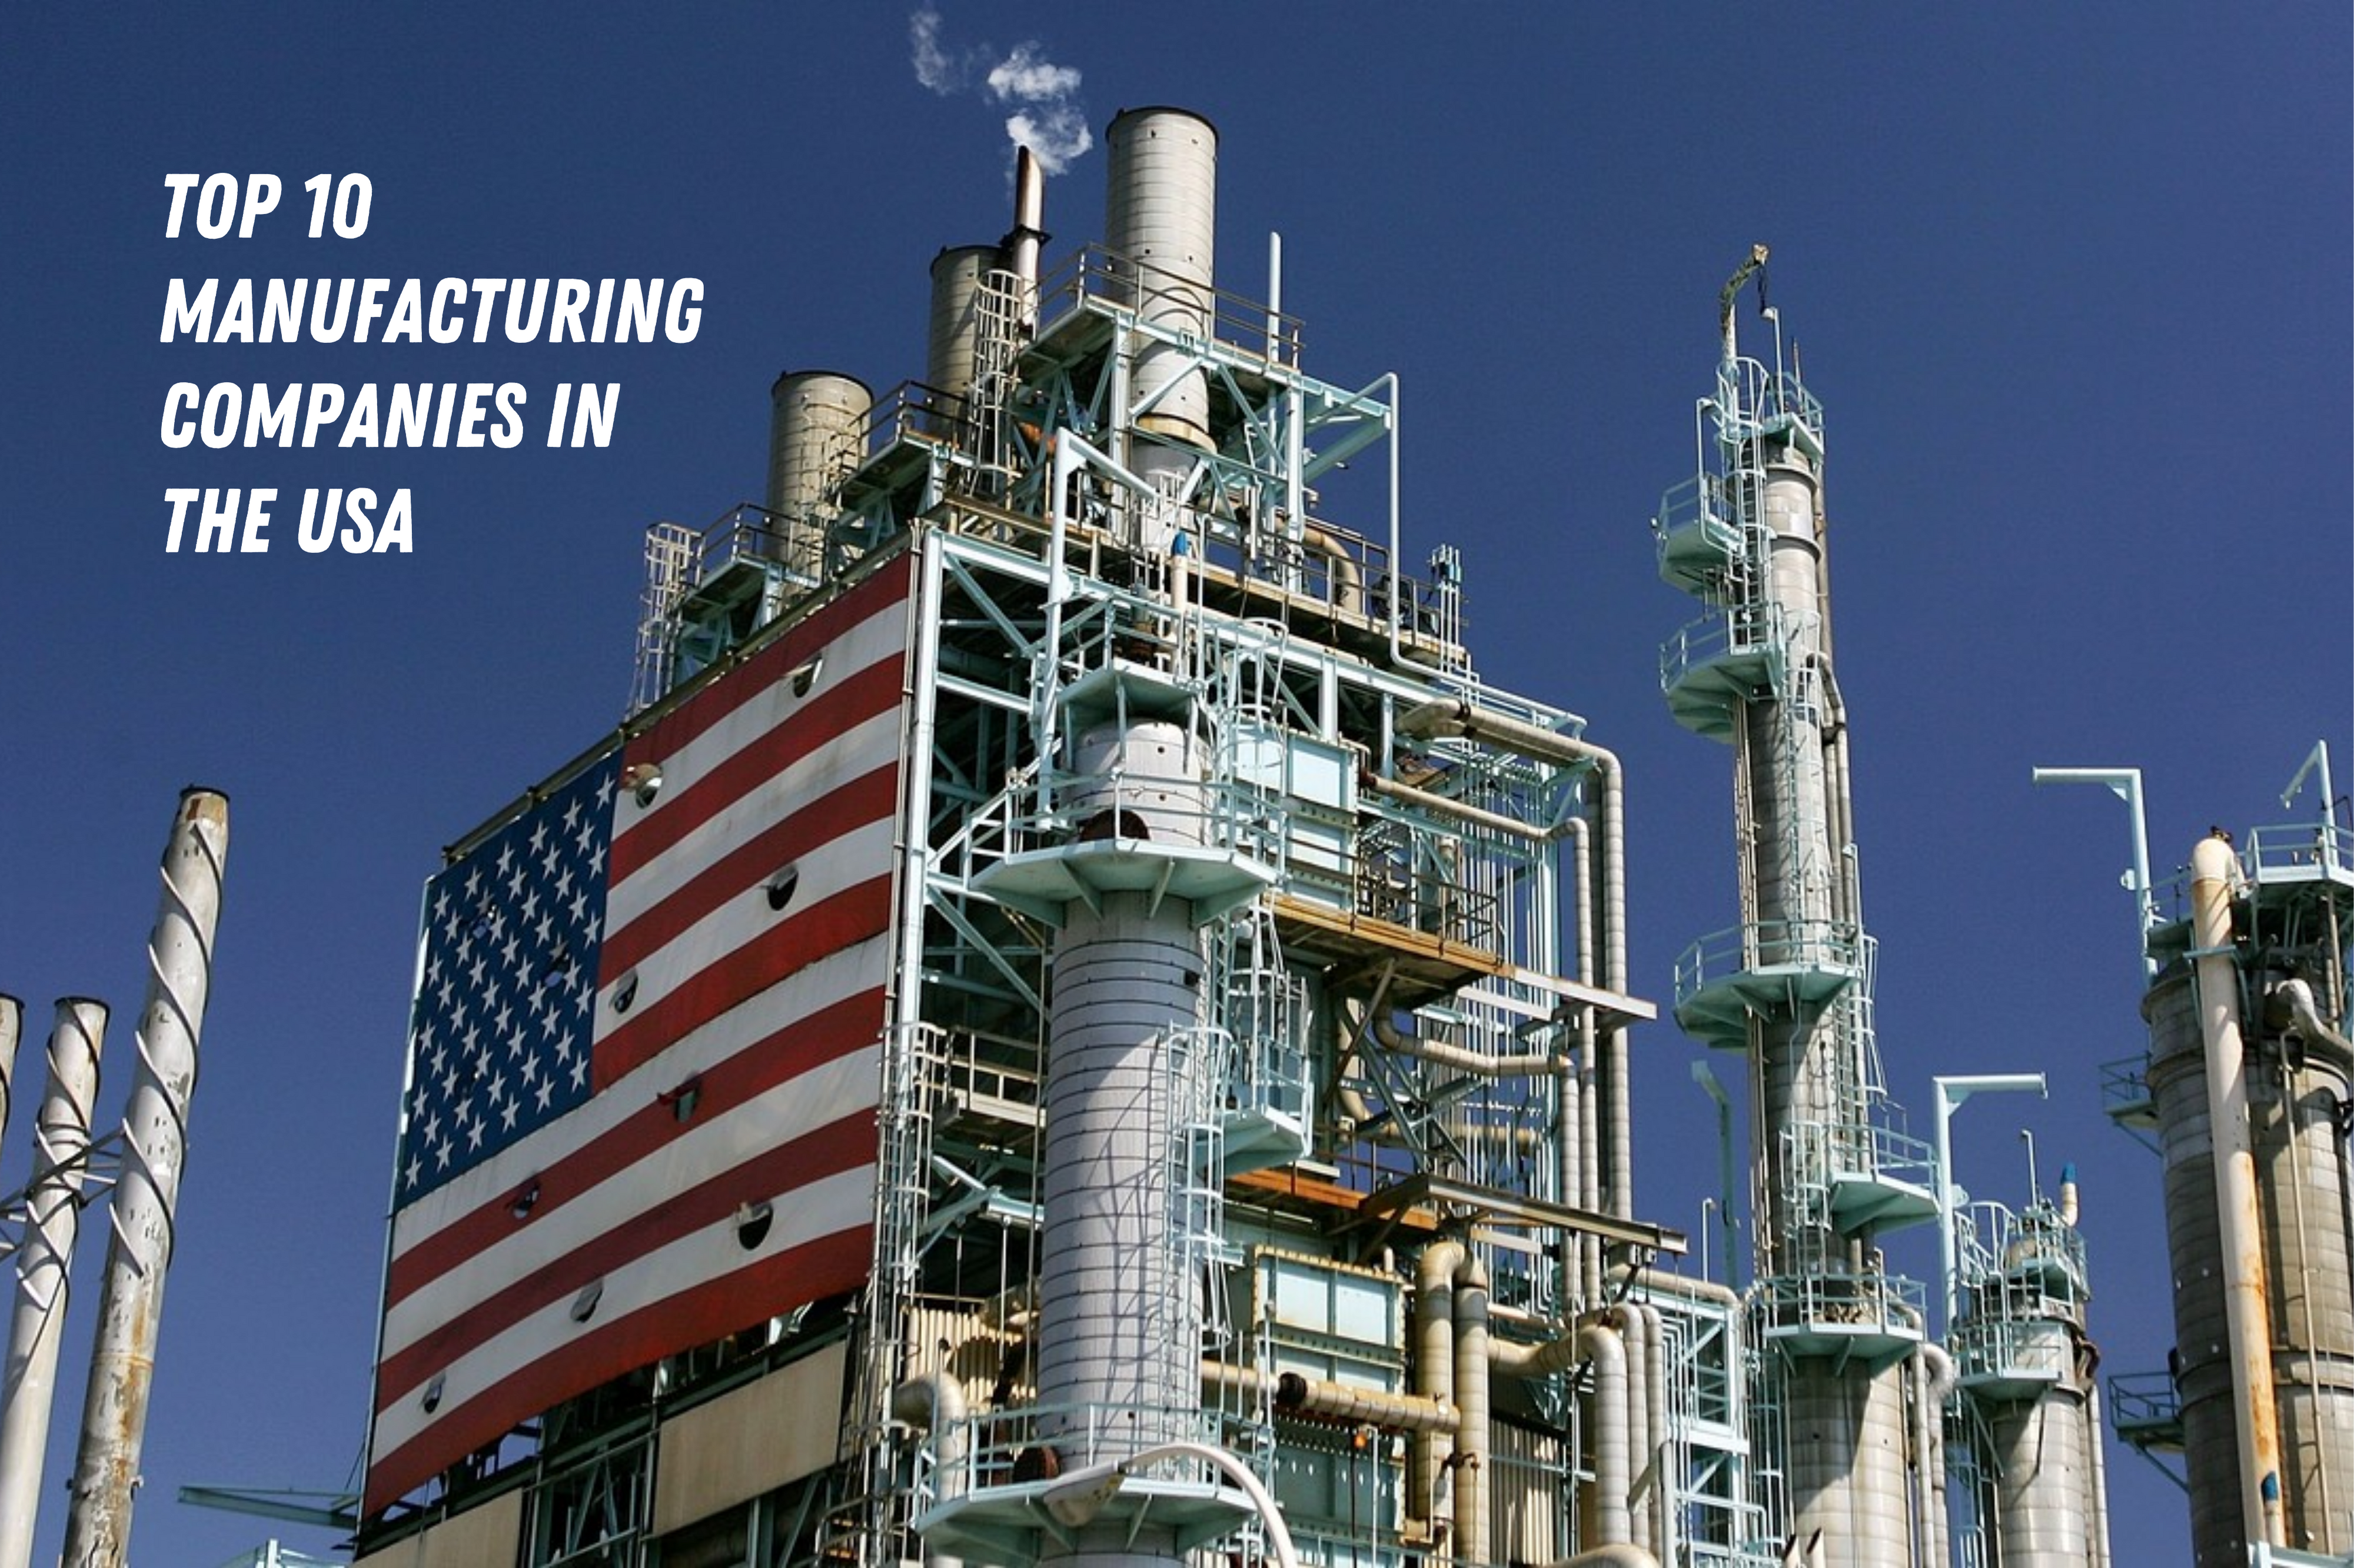 Top 10 Manufacturing Companies in the USA